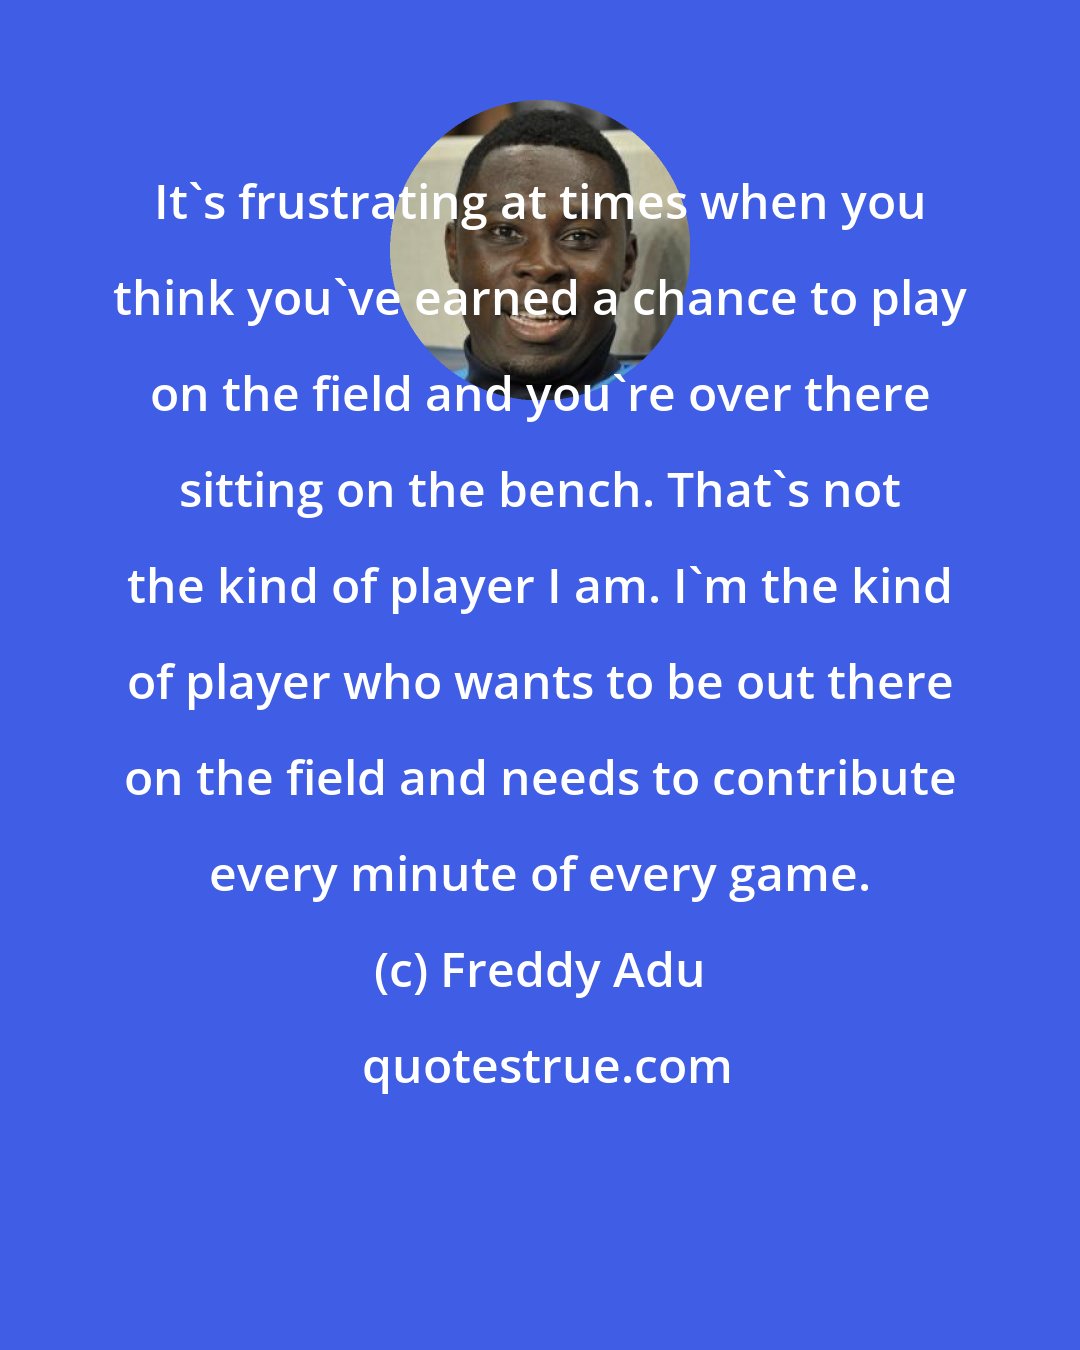 Freddy Adu: It's frustrating at times when you think you've earned a chance to play on the field and you're over there sitting on the bench. That's not the kind of player I am. I'm the kind of player who wants to be out there on the field and needs to contribute every minute of every game.